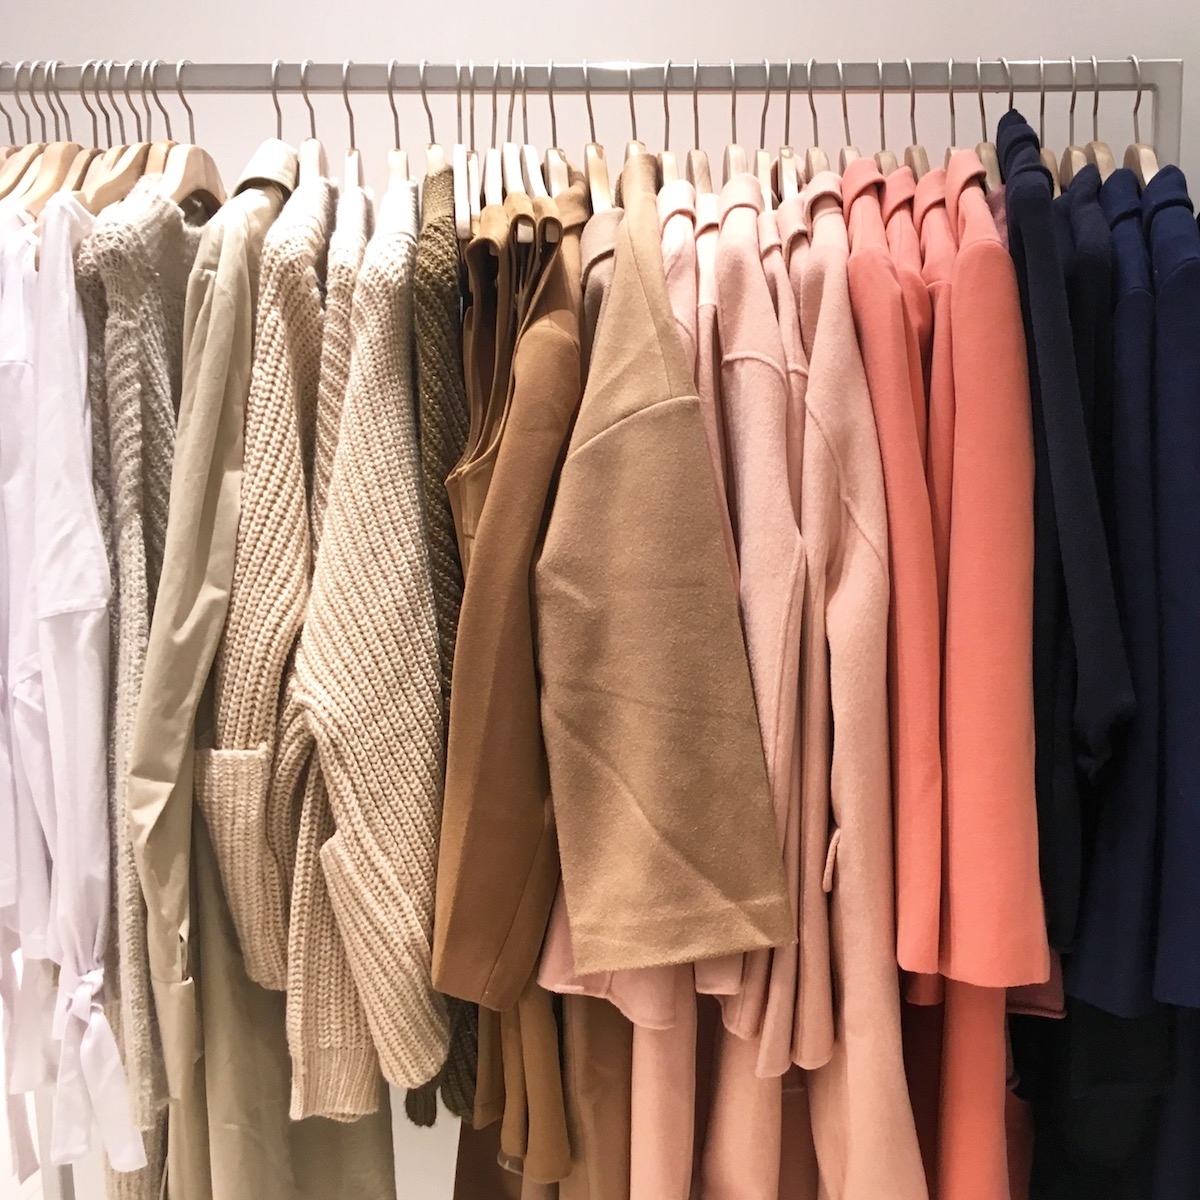 A rack of clothes in neutral colors, pink, and navy